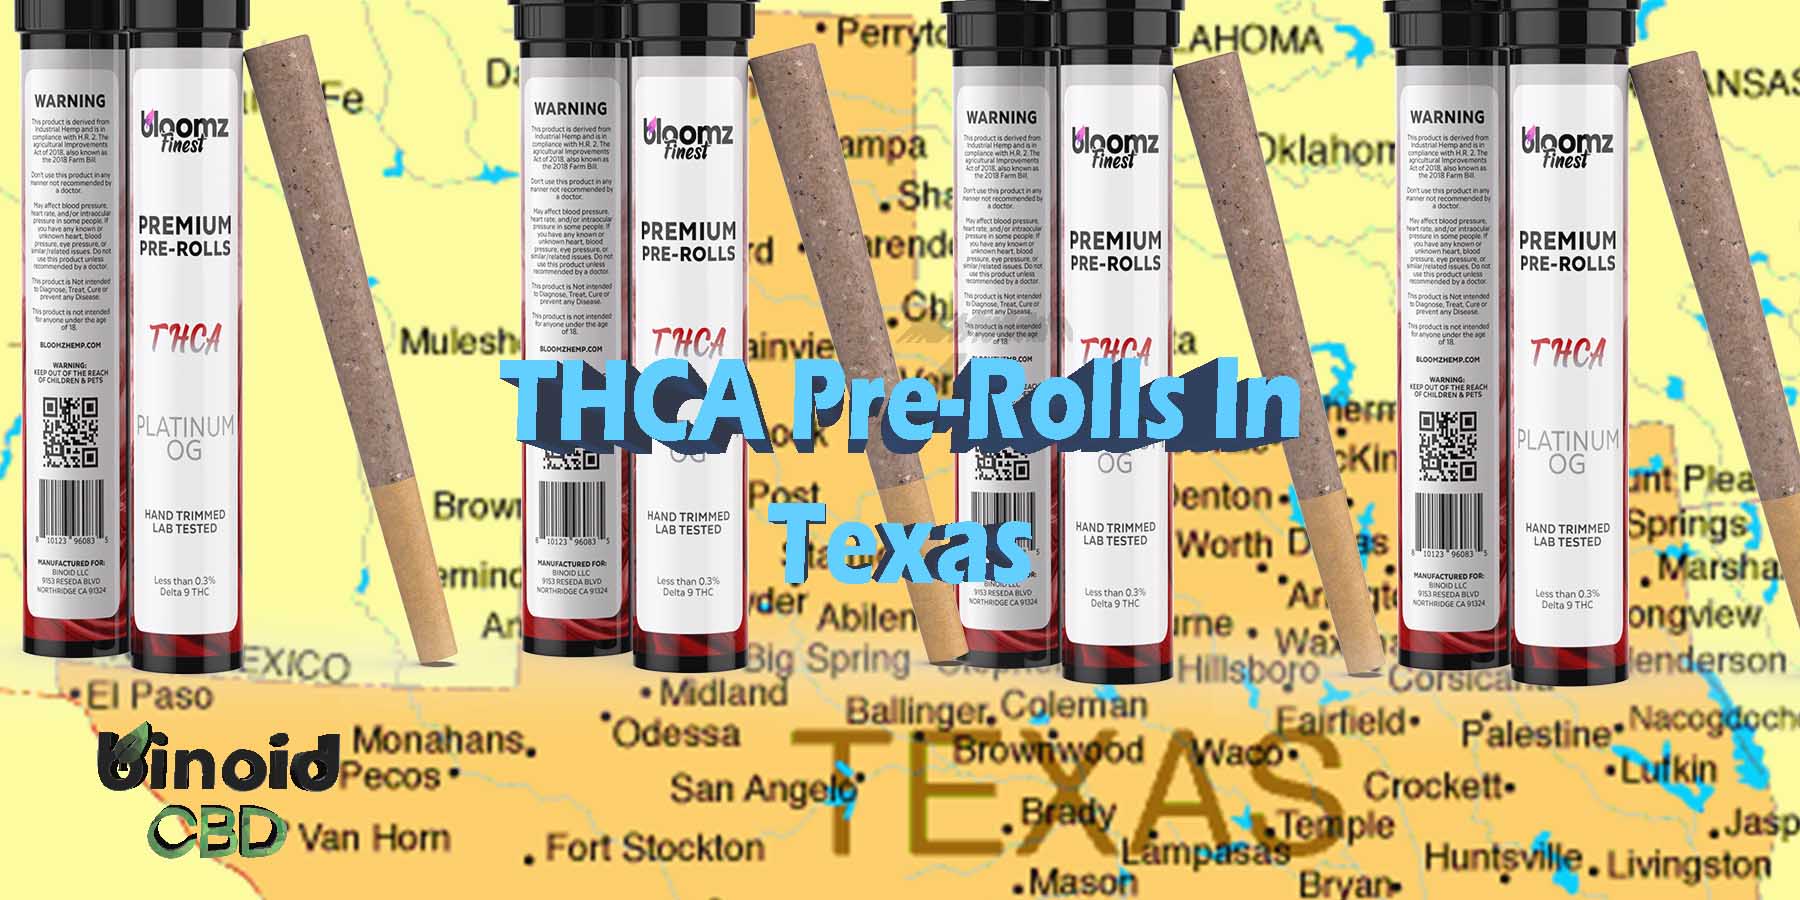 THCA Pre-Rolls In Texas Hemp Flower Indica Where To Get Near Me Best Place Lowest Price Coupon Discount Strongest Brand Bloomz